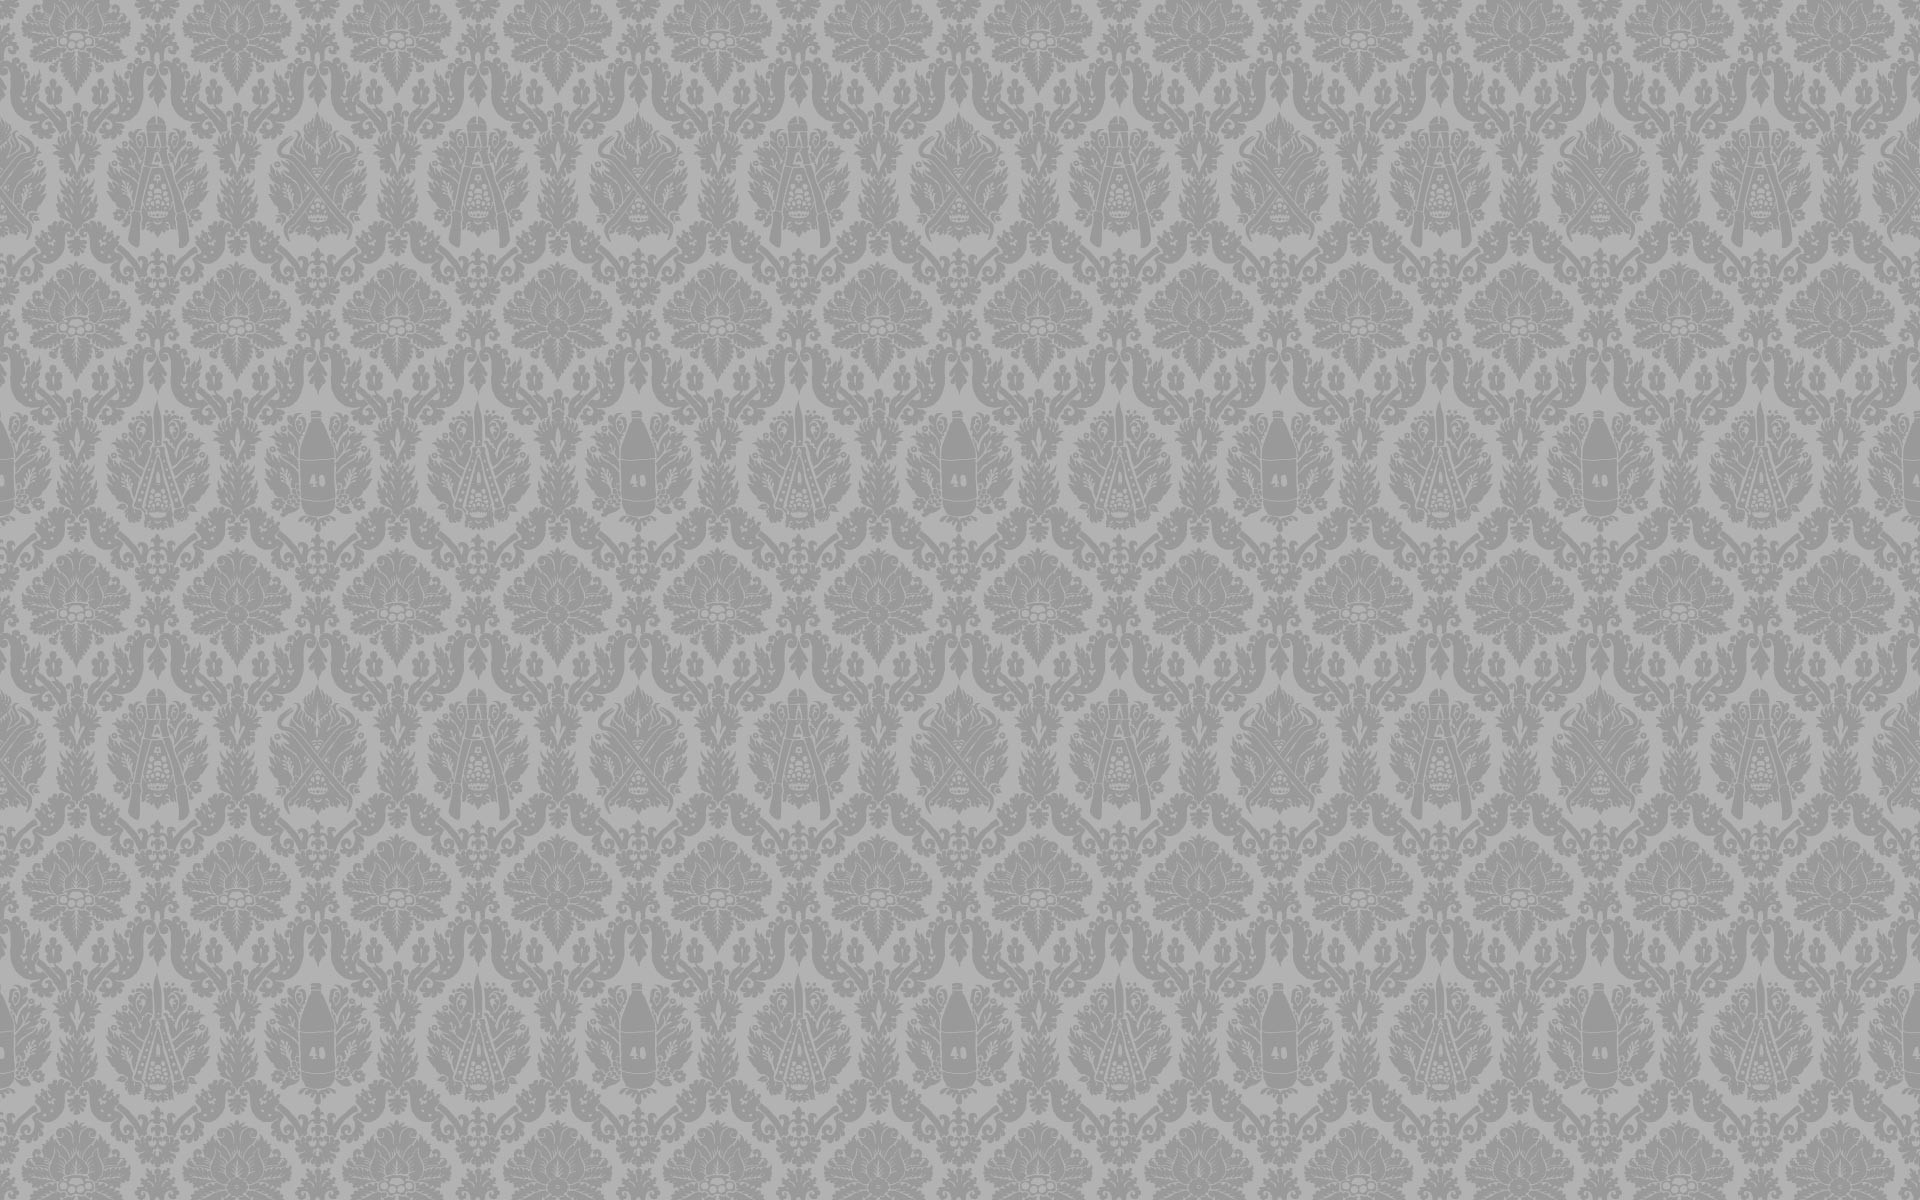 1920x1200 Elegant embossed floral background - snowy white. Love this one! |  Backgrounds and Wallpaper | Pinterest | Backgrounds free